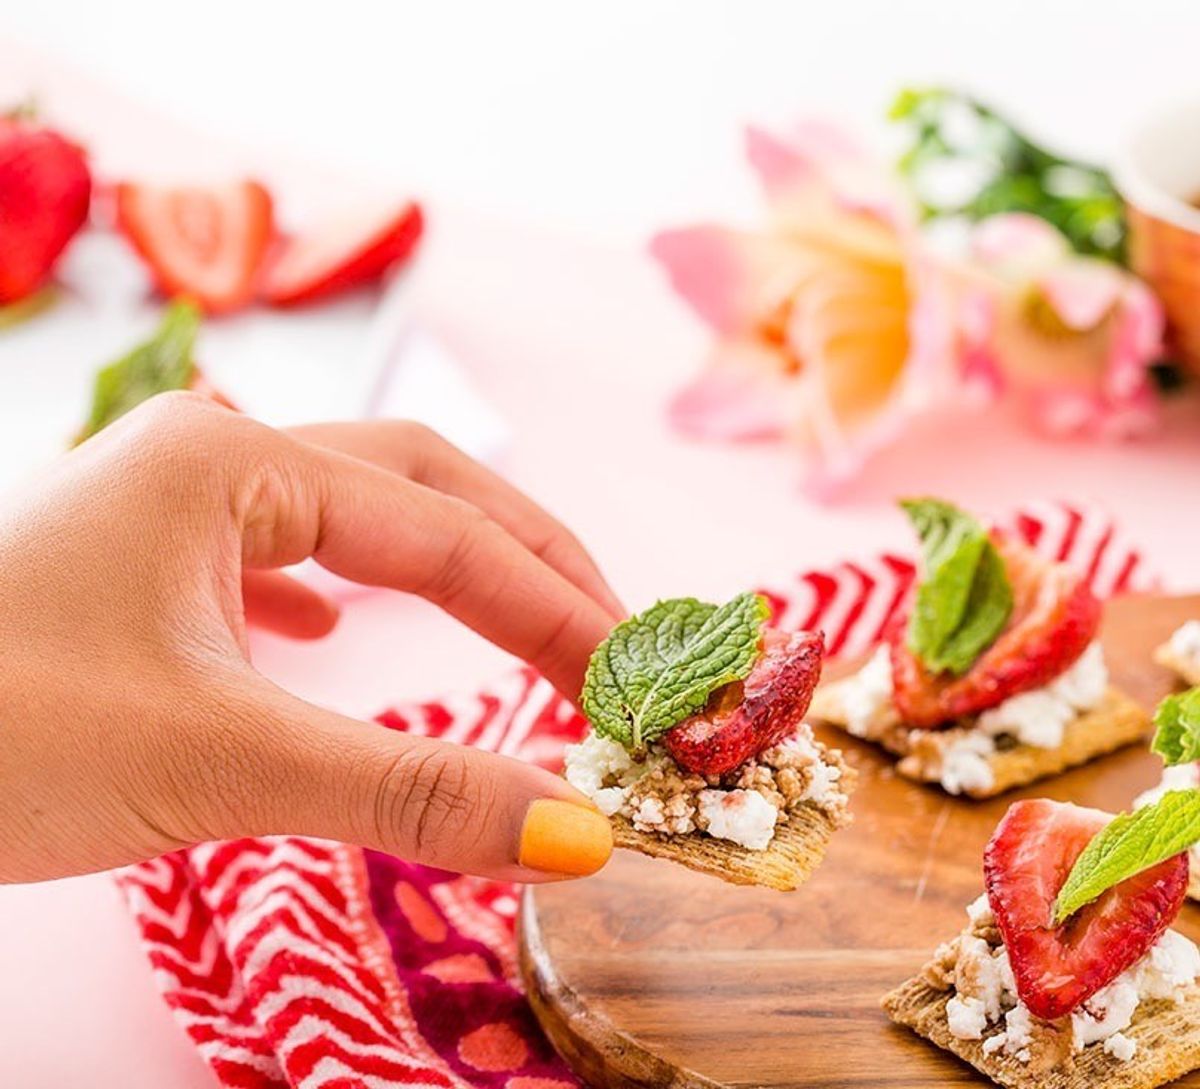 strawberry bites are one of the best finger foods for parties